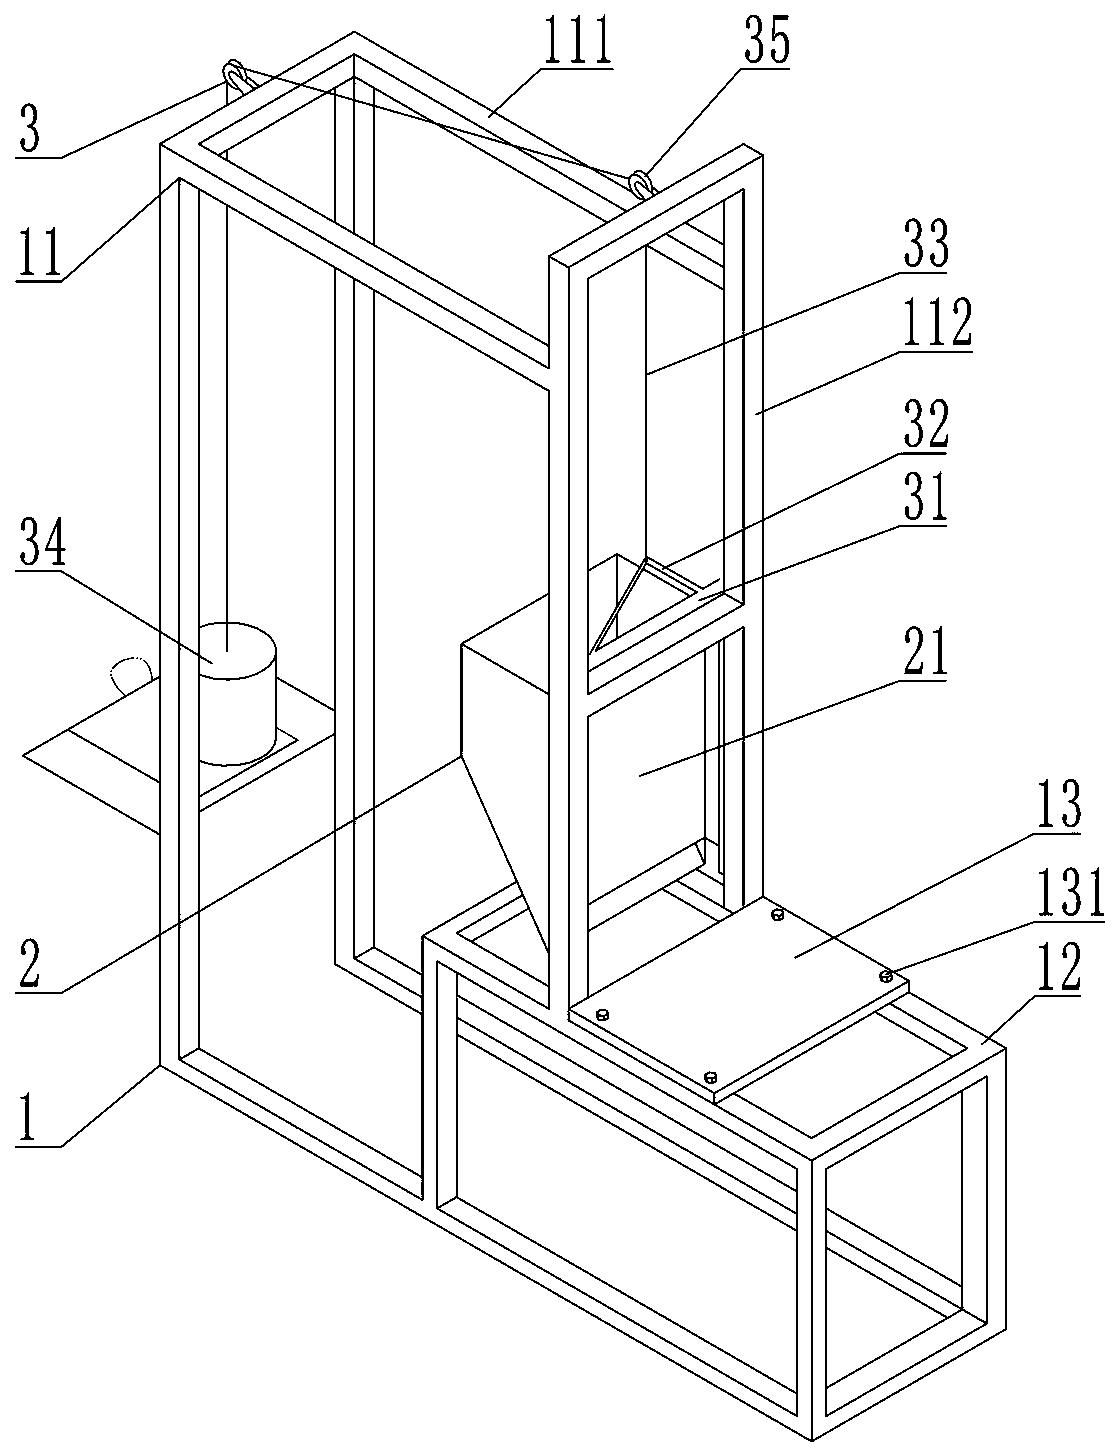 Retaining structure impact load simulation test device and method